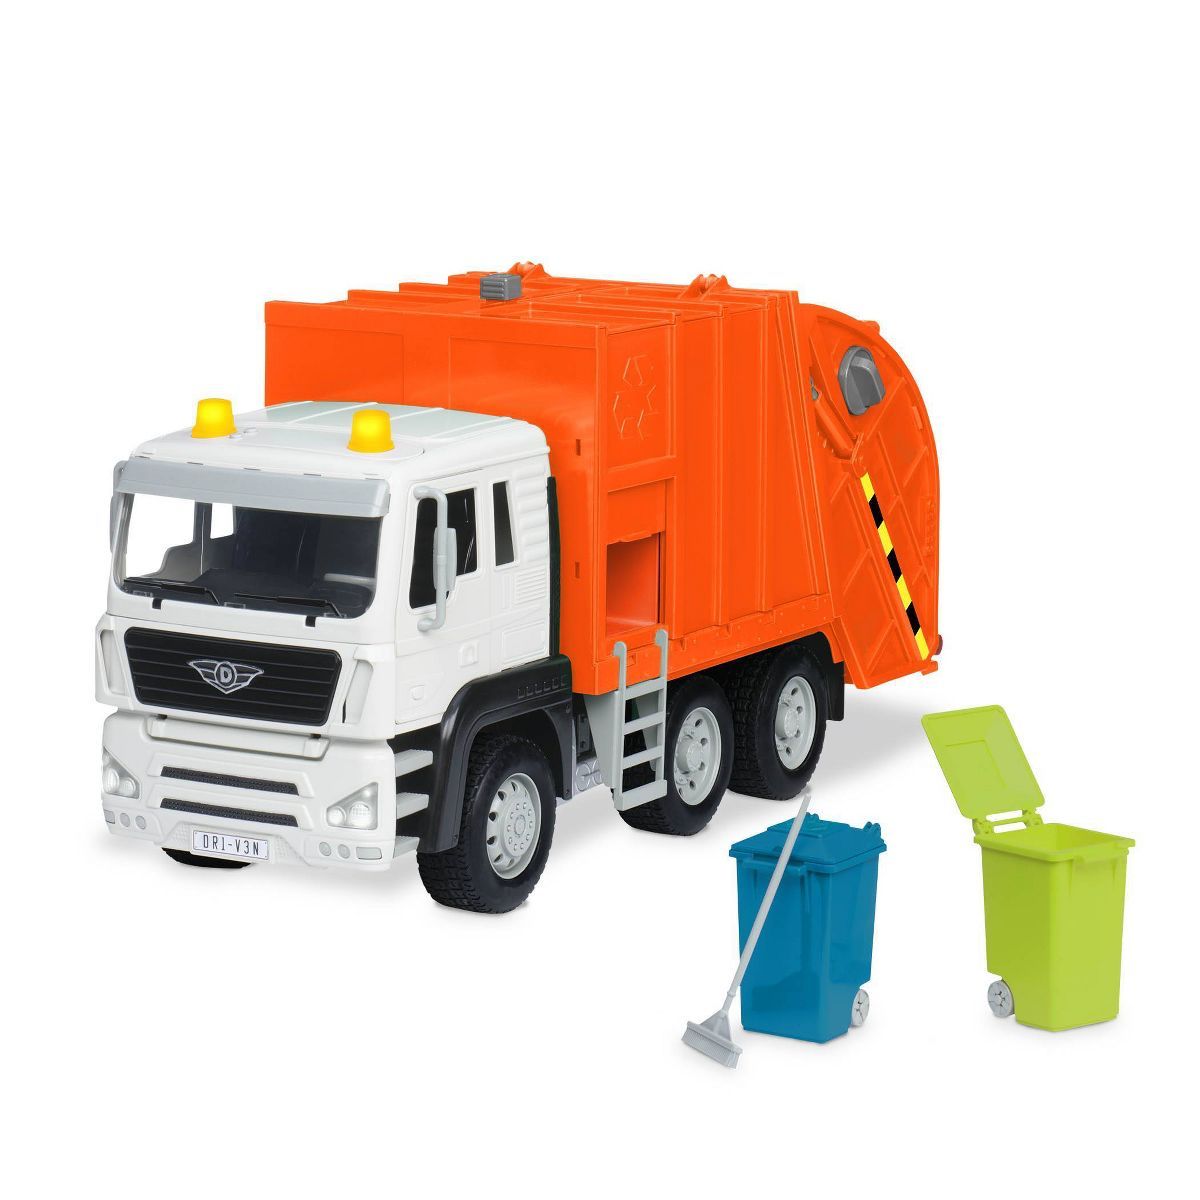 DRIVEN by Battat – Toy Recycling Truck (Orange) – Standard Series | Target